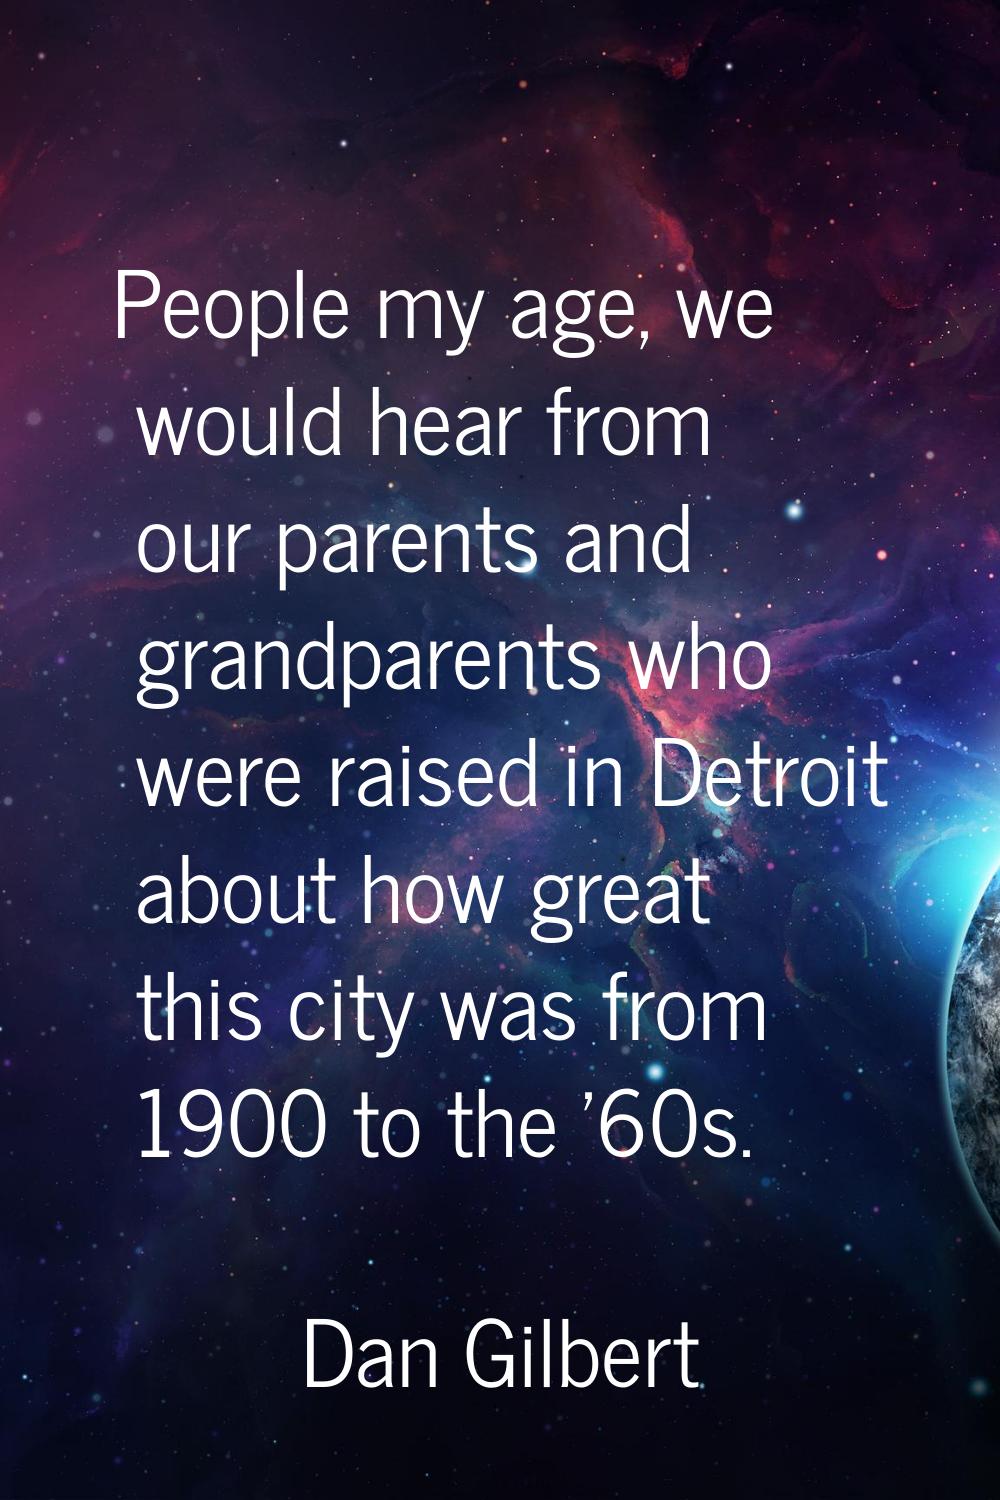 People my age, we would hear from our parents and grandparents who were raised in Detroit about how